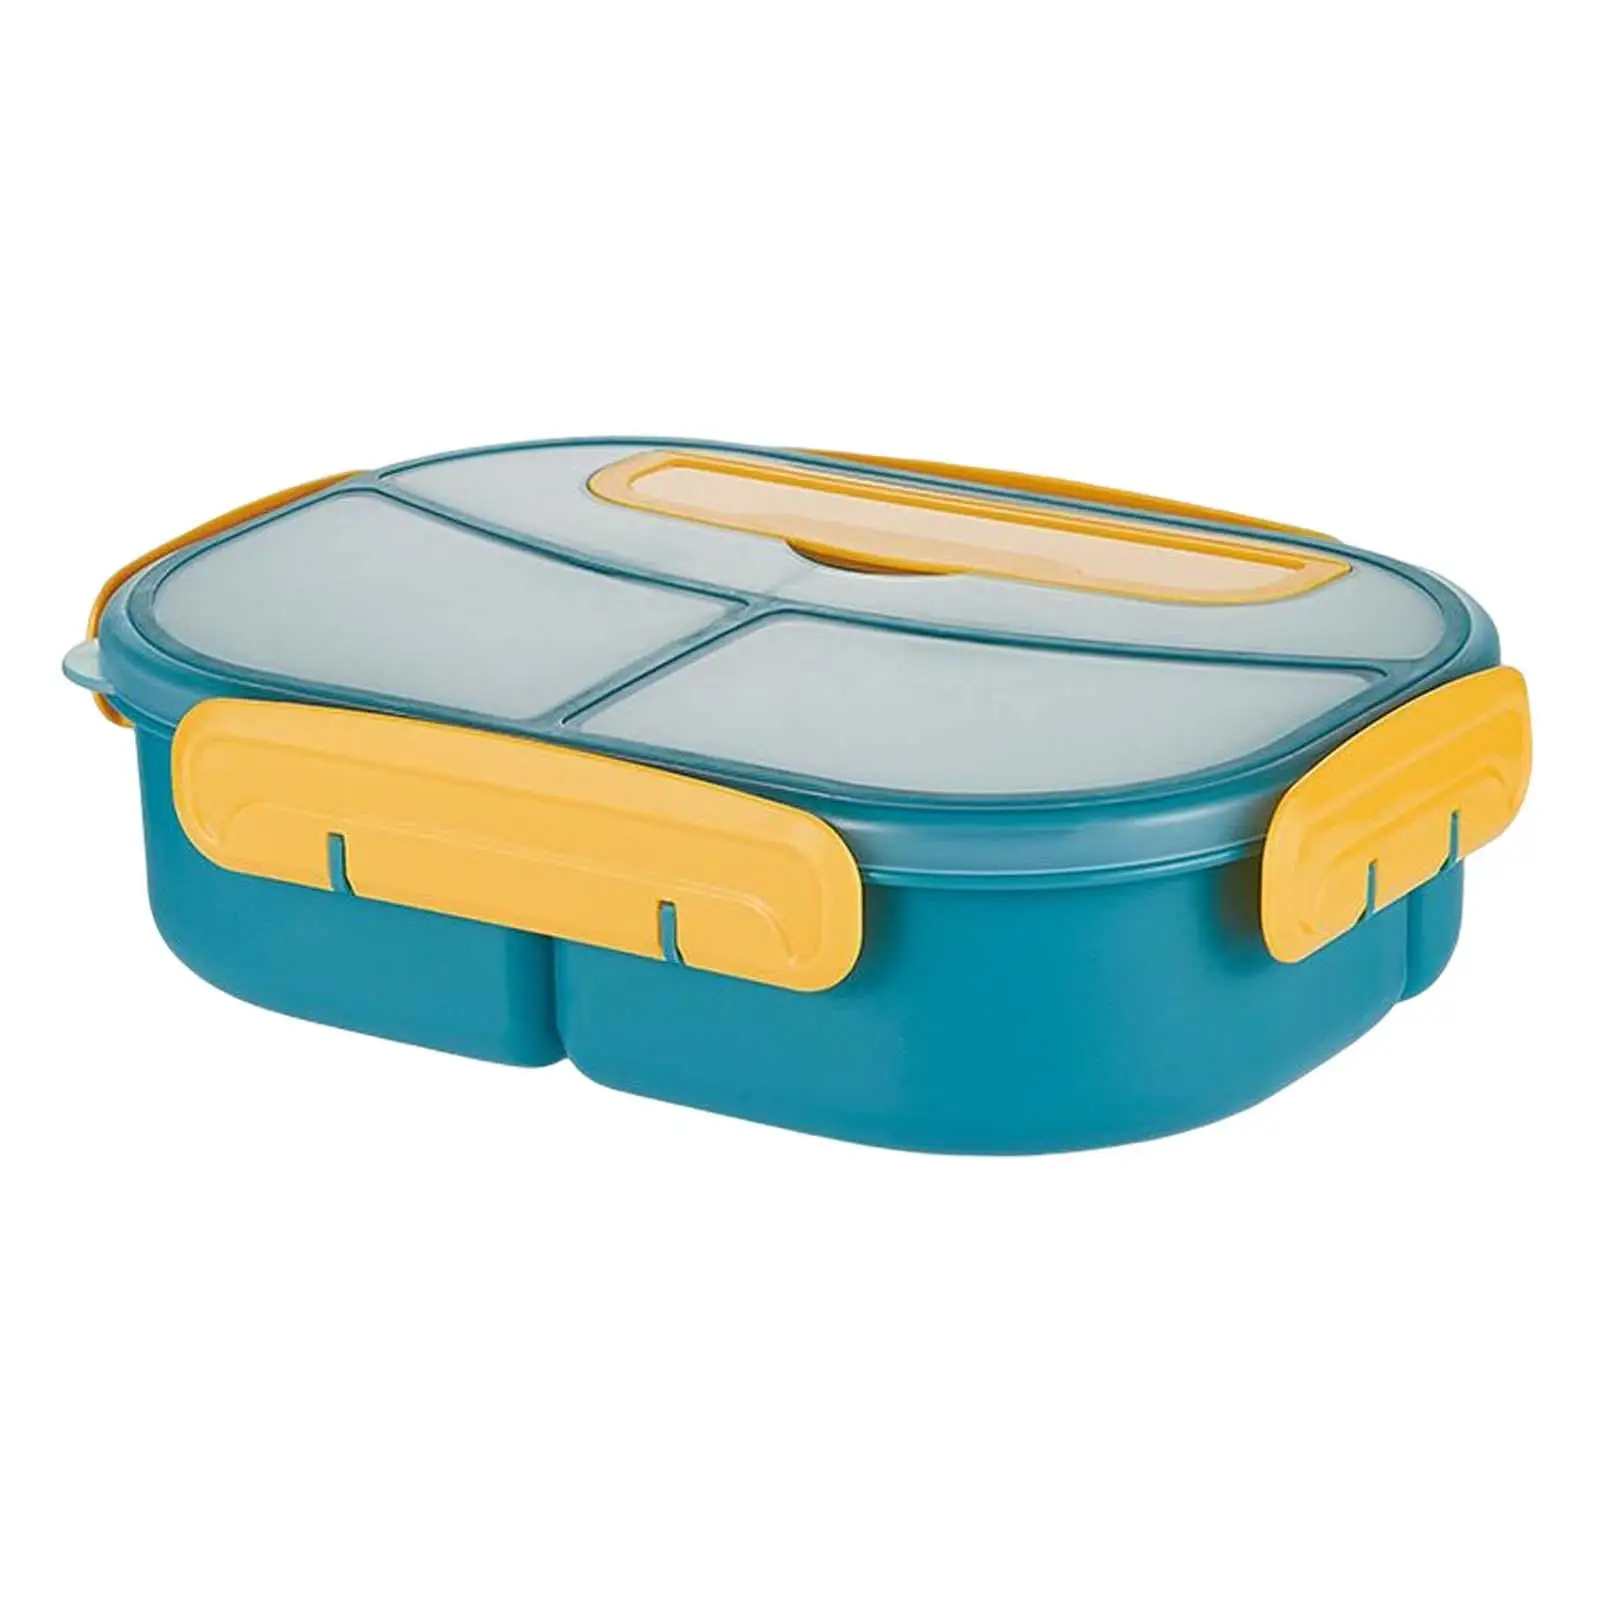 Travelers Lunch Box Microwave Freezer Safe Multi Compartments for Picnic office